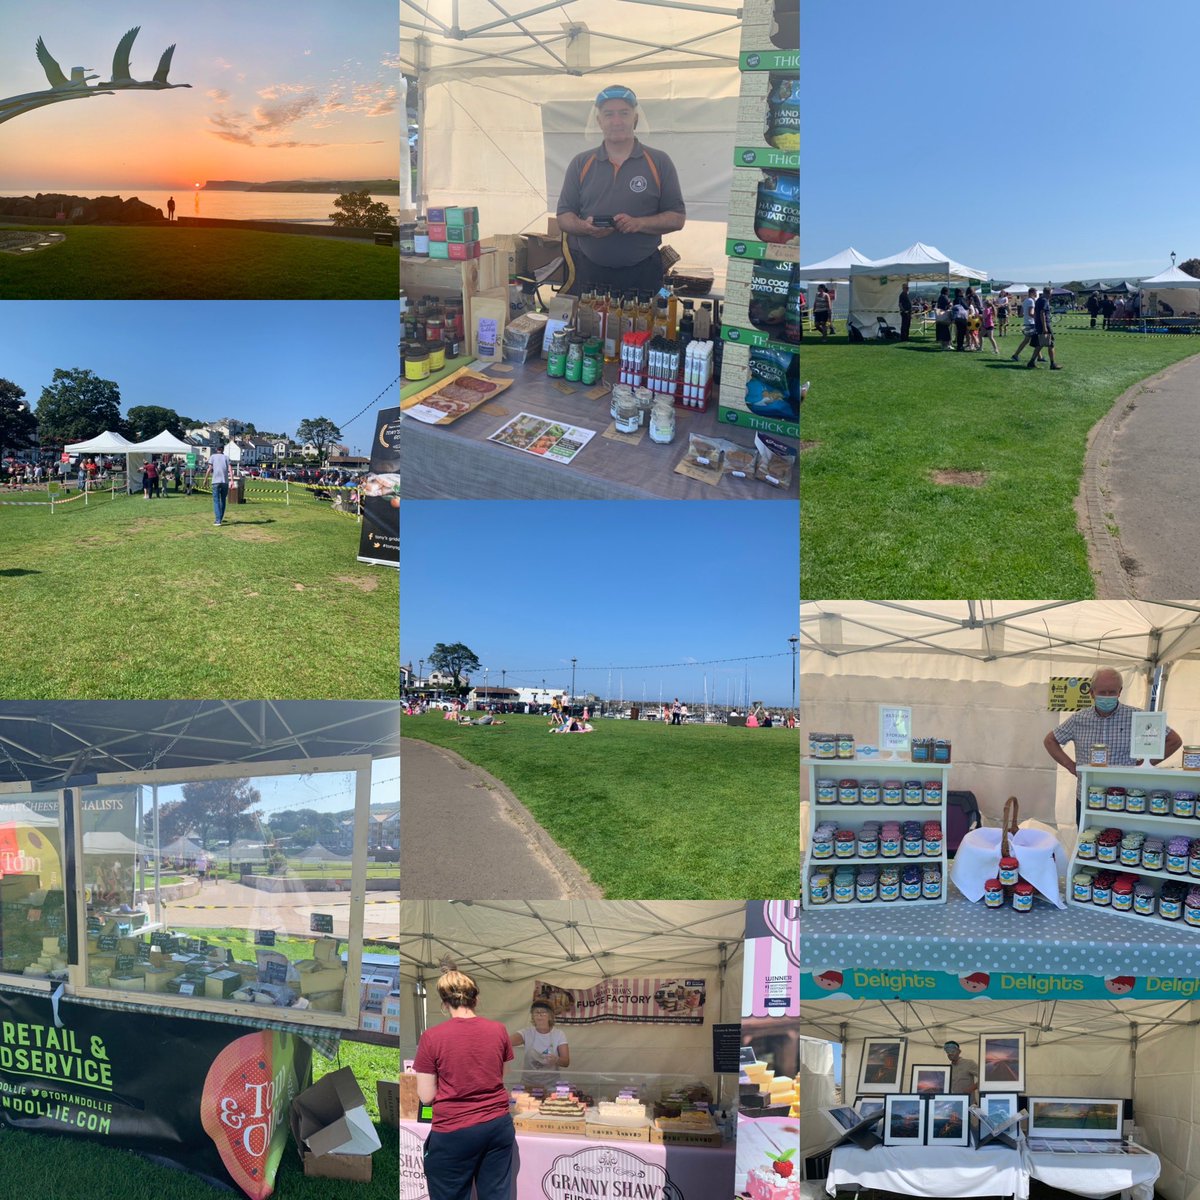 Thanks to everyone, visitors, traders, staff, volunteers and ccgbc for their support for our first market of 2020 today! 

Weather permitting the market will return to Ballycastle seafront again on Fri 21st August.